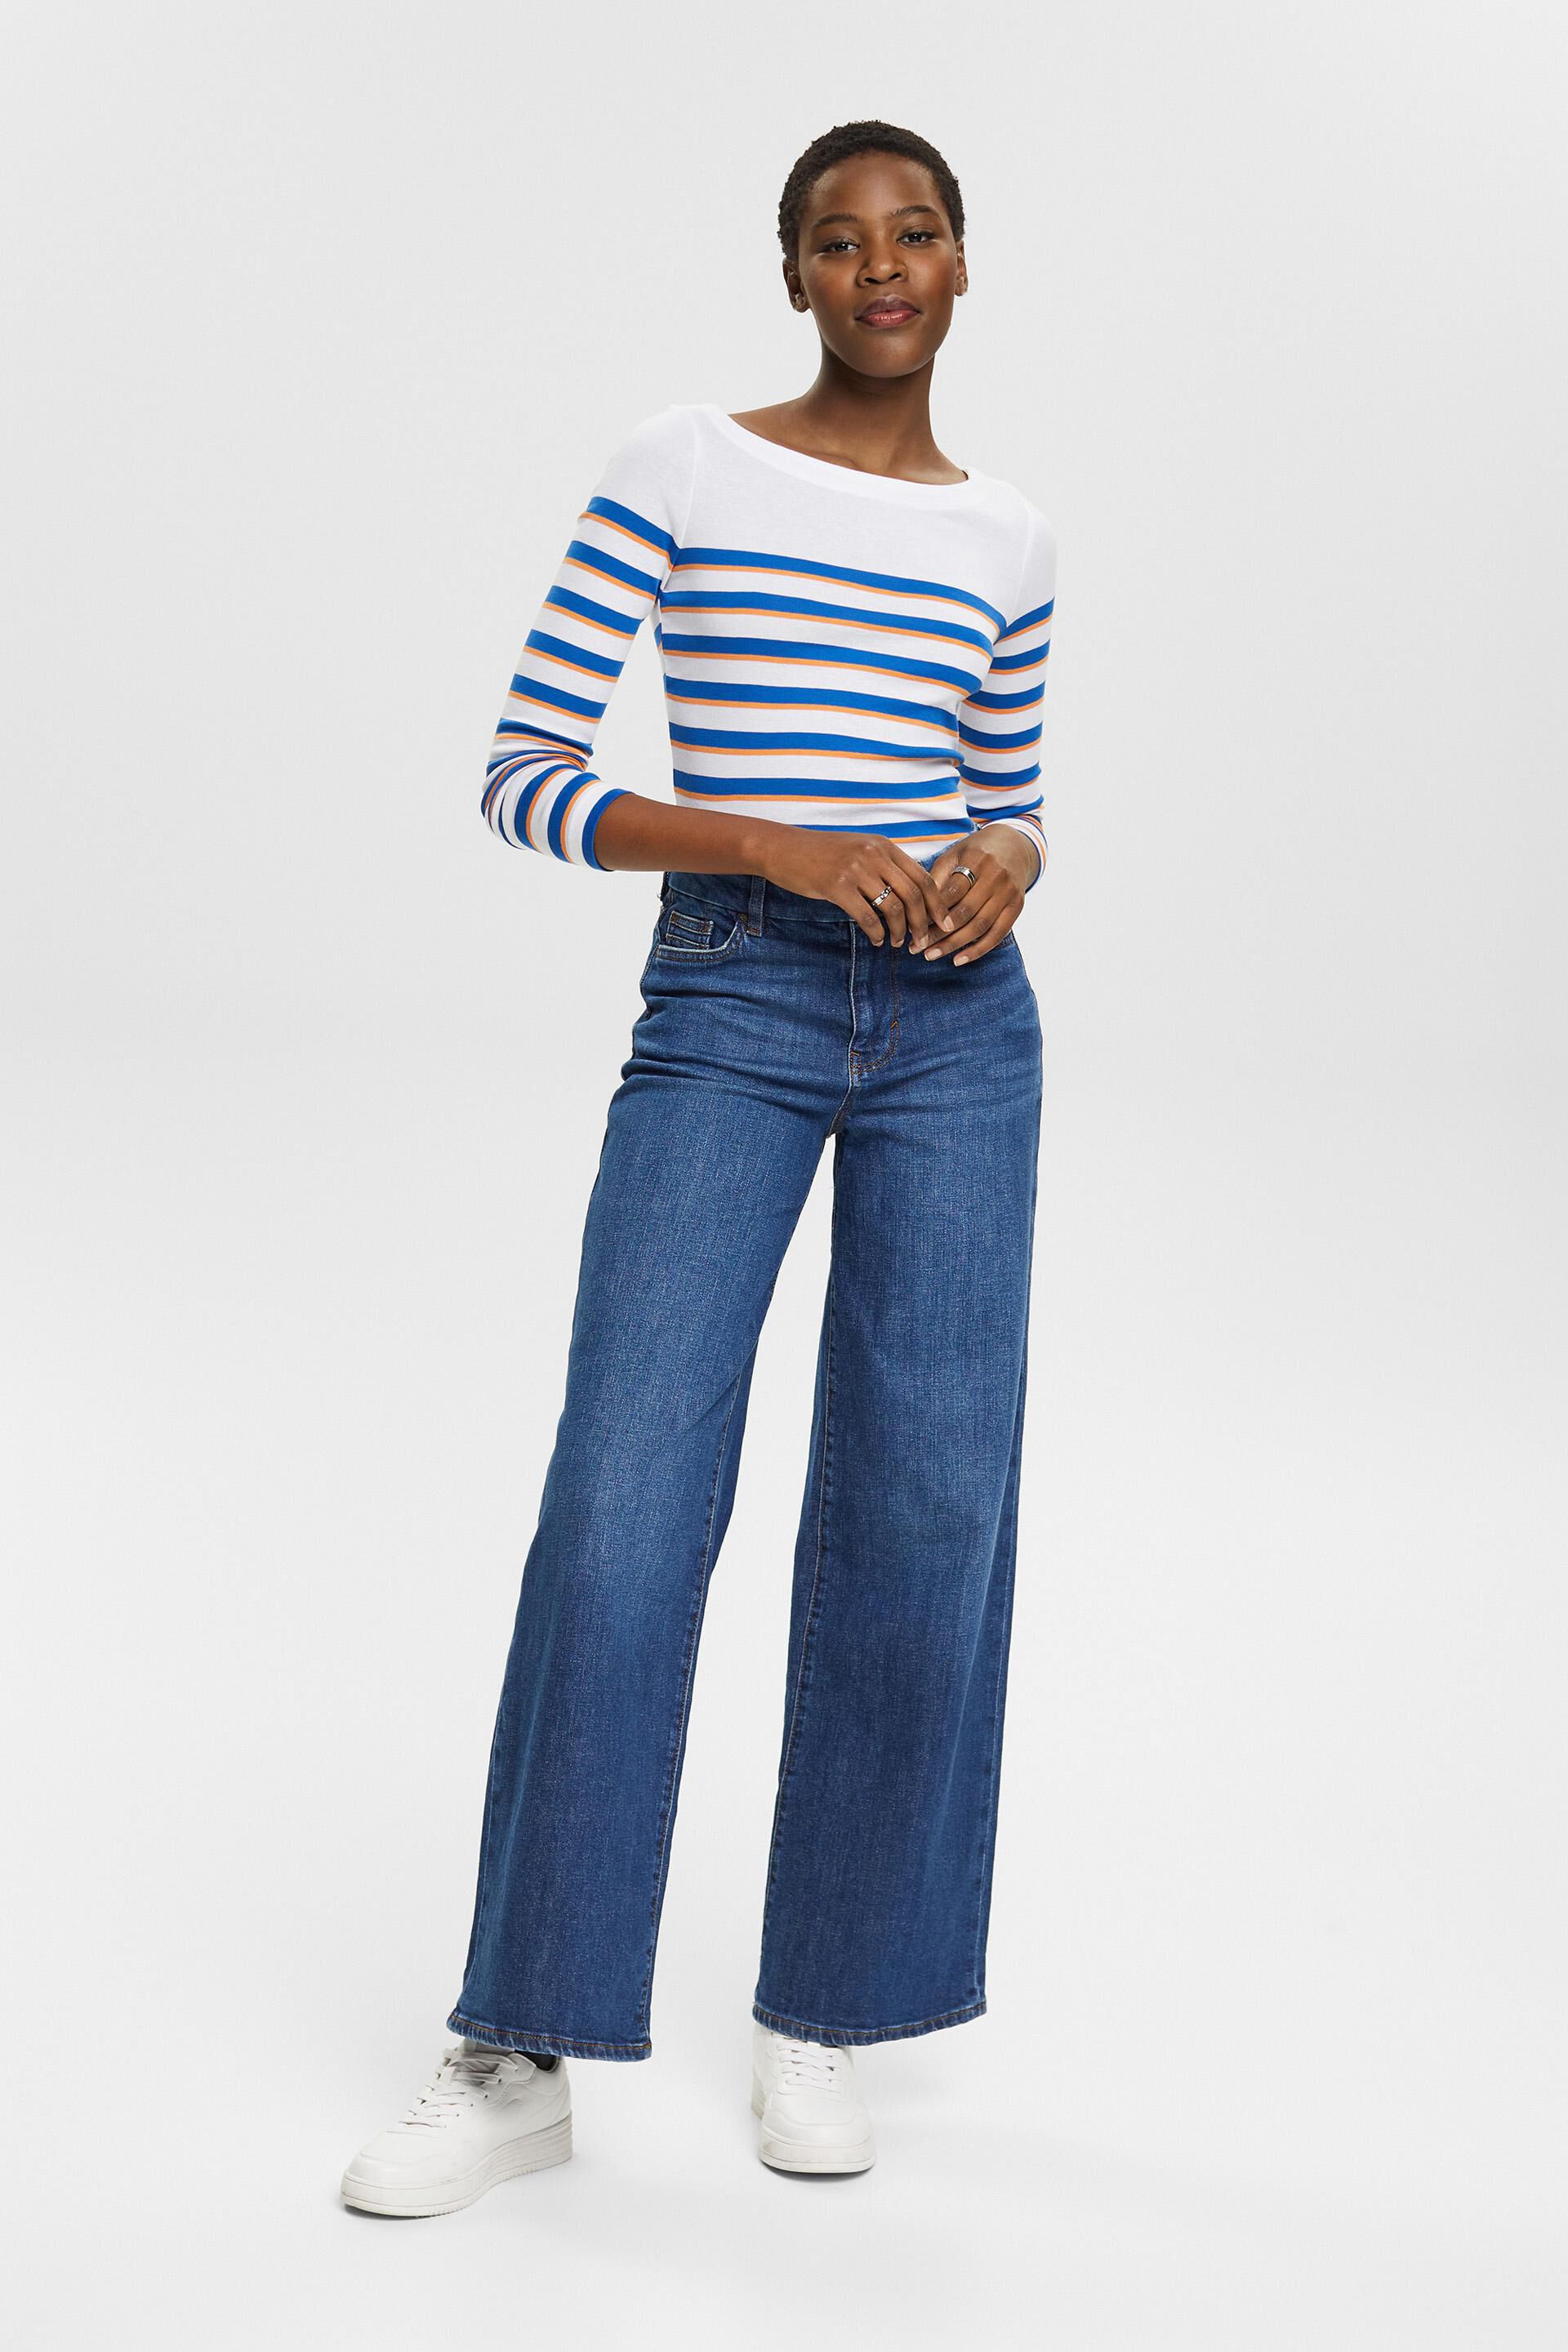 ESPRIT - Long-sleeved striped top at our online shop